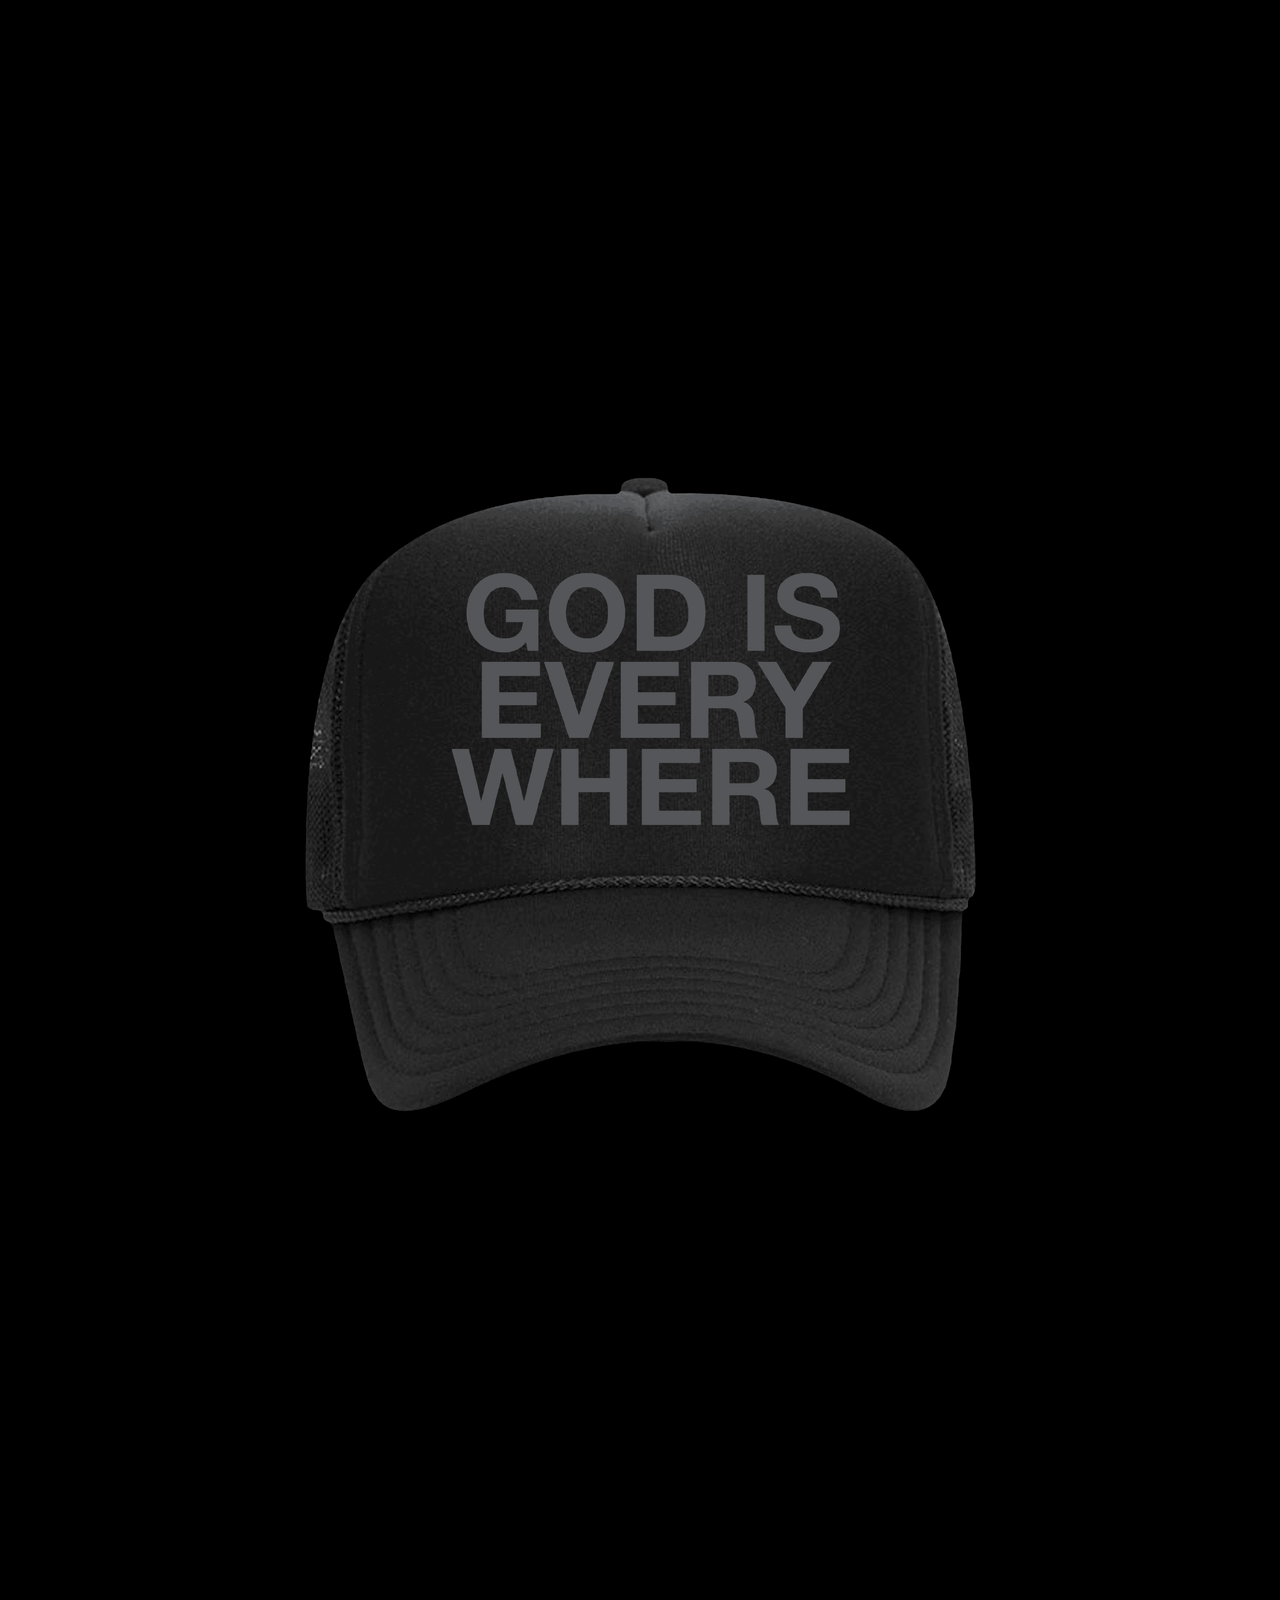  GOD IS EVERYWHERE PREMIUM CHRISTIAN APPAREL COLLECTION. Black trucker hat and cement shirt by NHIM APPAREL